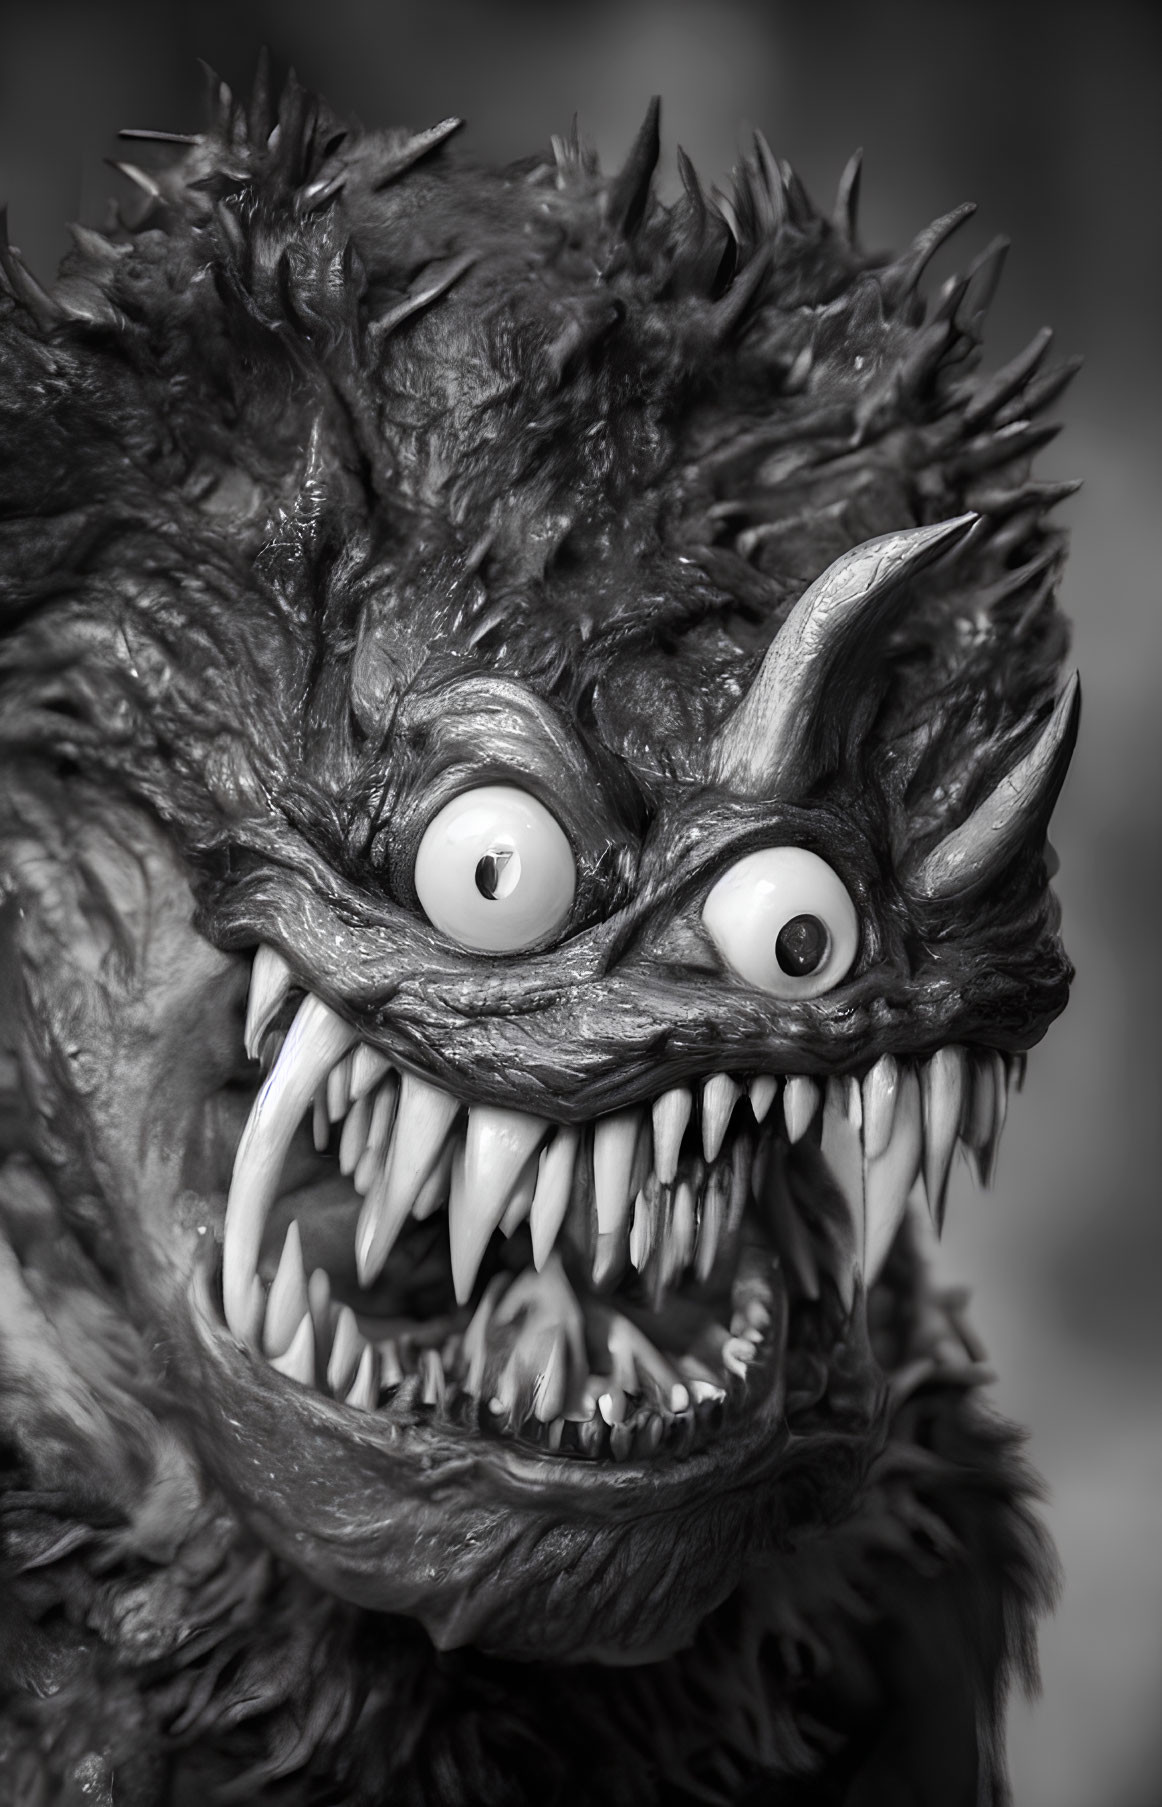 Monochrome image of creature with sharp teeth and spiky fur